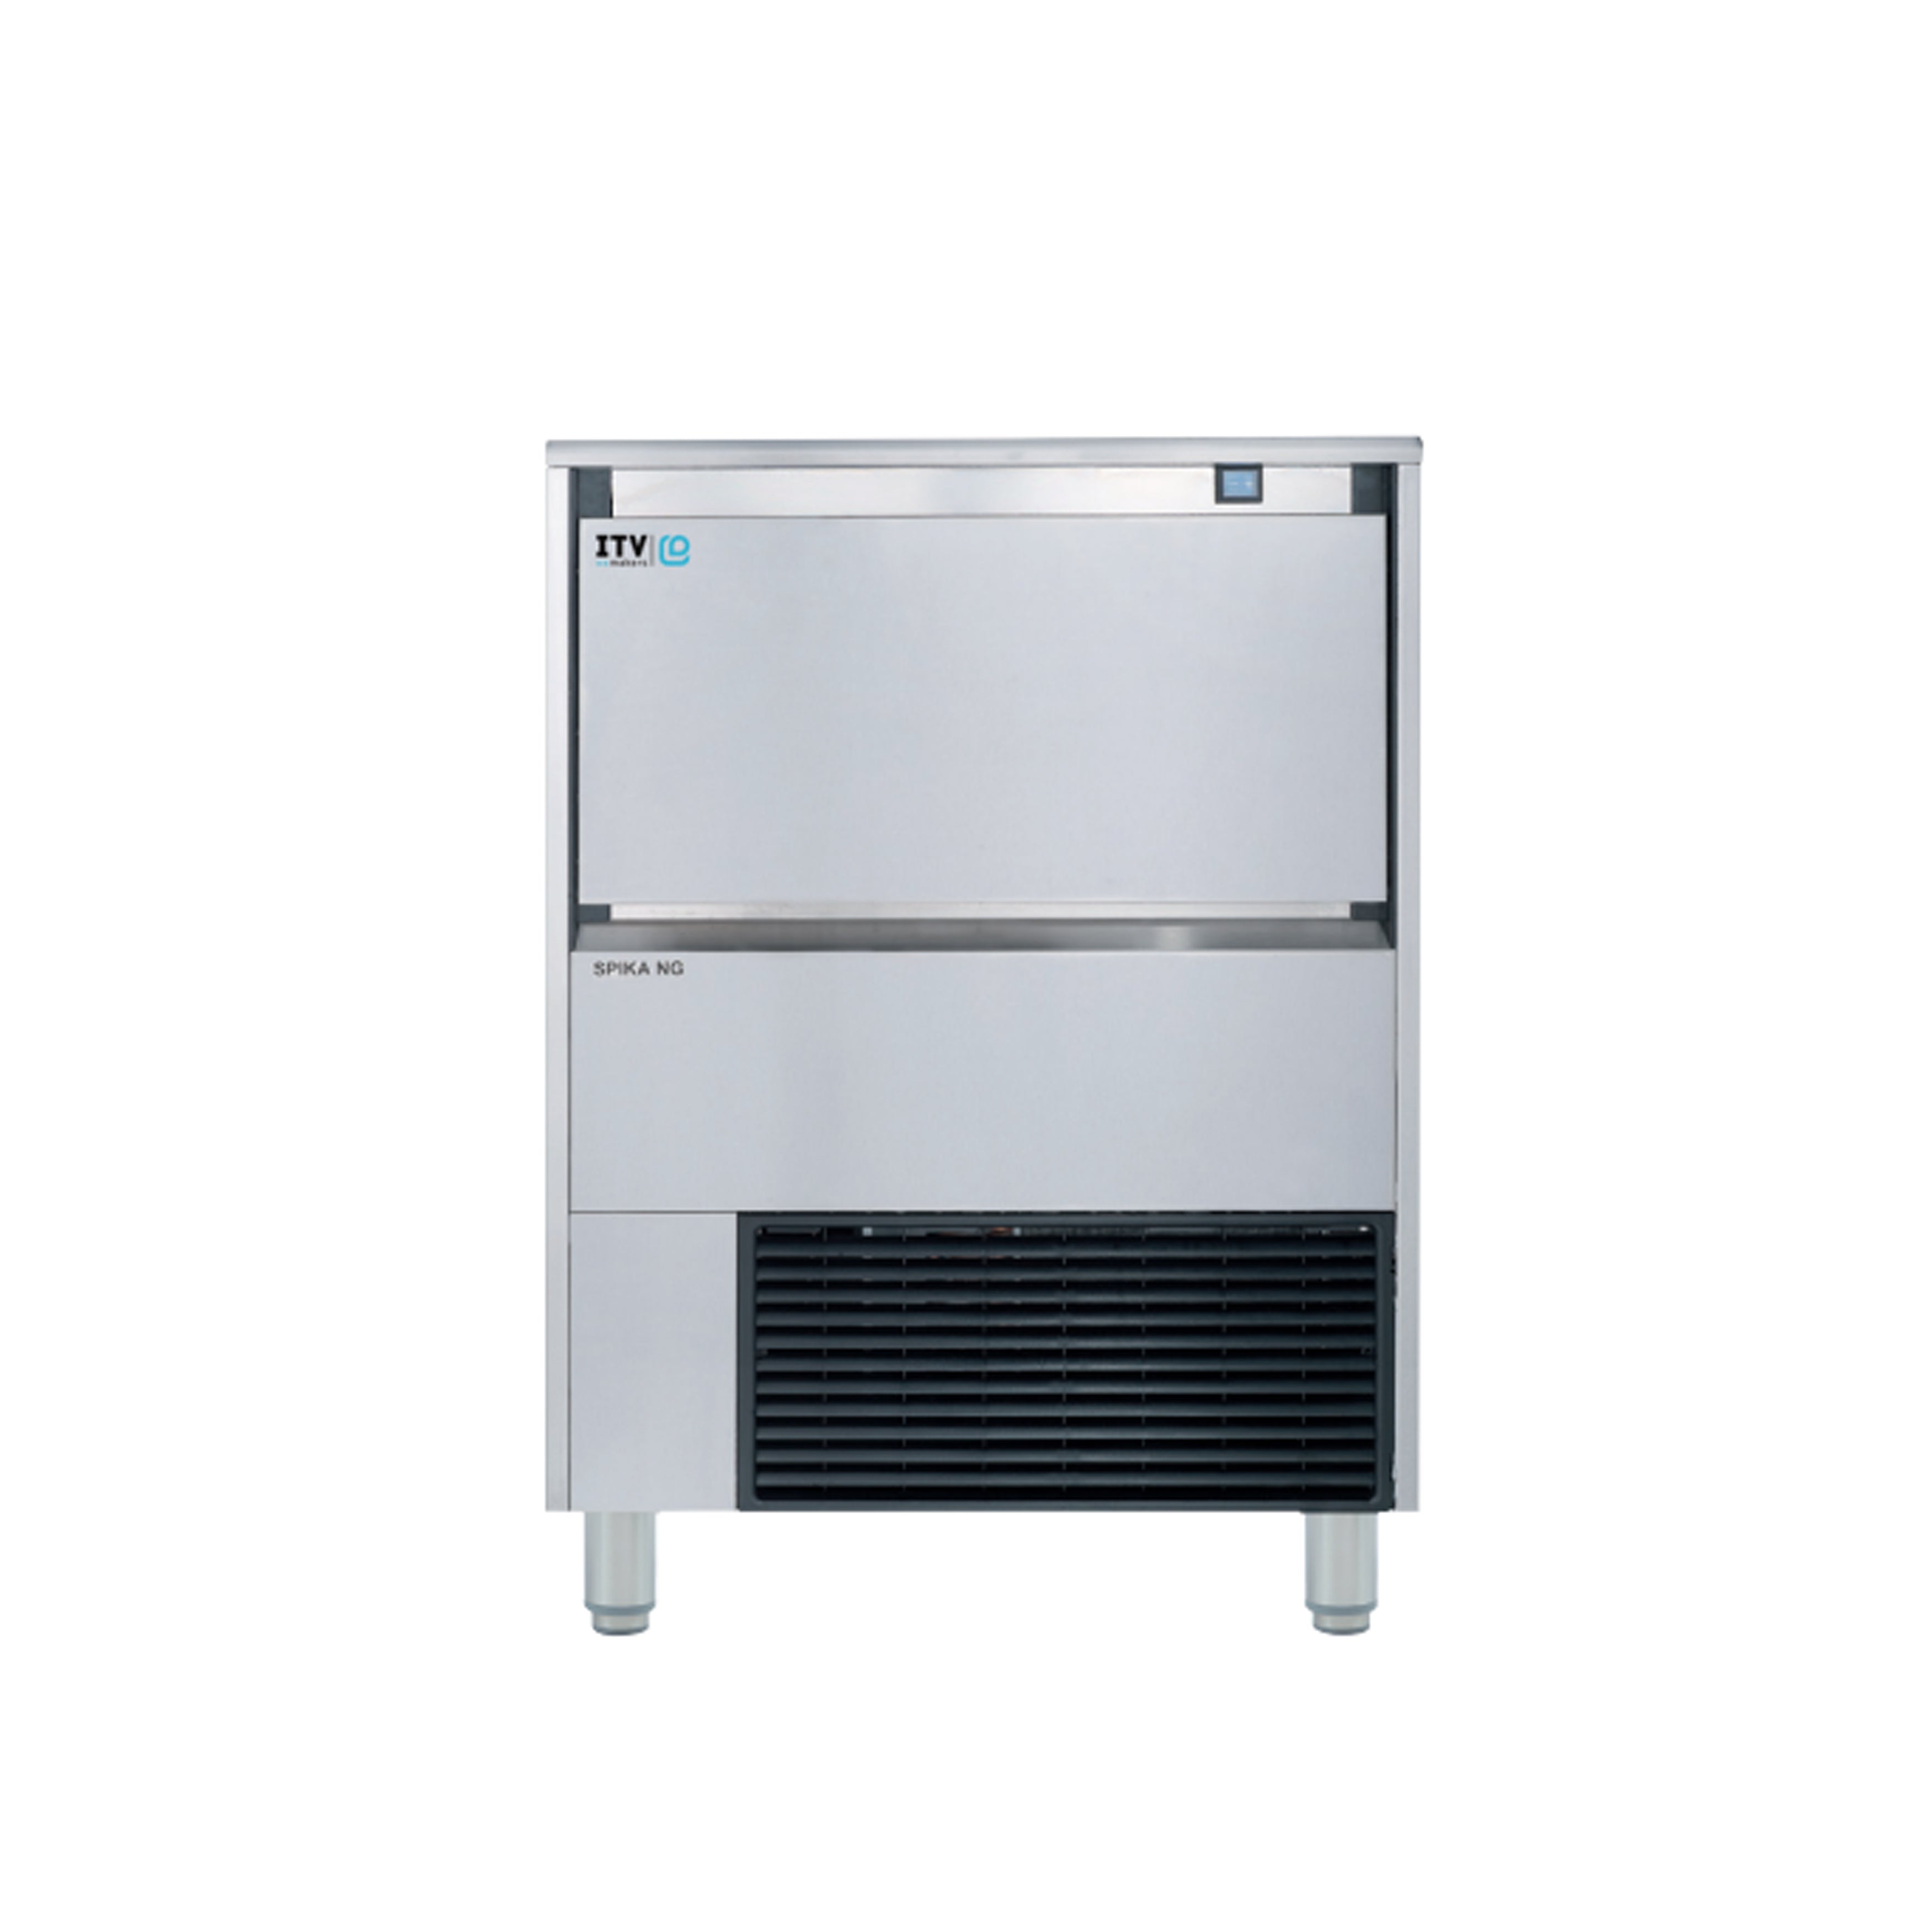 ITV - SPIKA NG 130, Commercial Spika Cubers under-counter Ice Maker Self-Contained Ice Cube Machine 139lbs